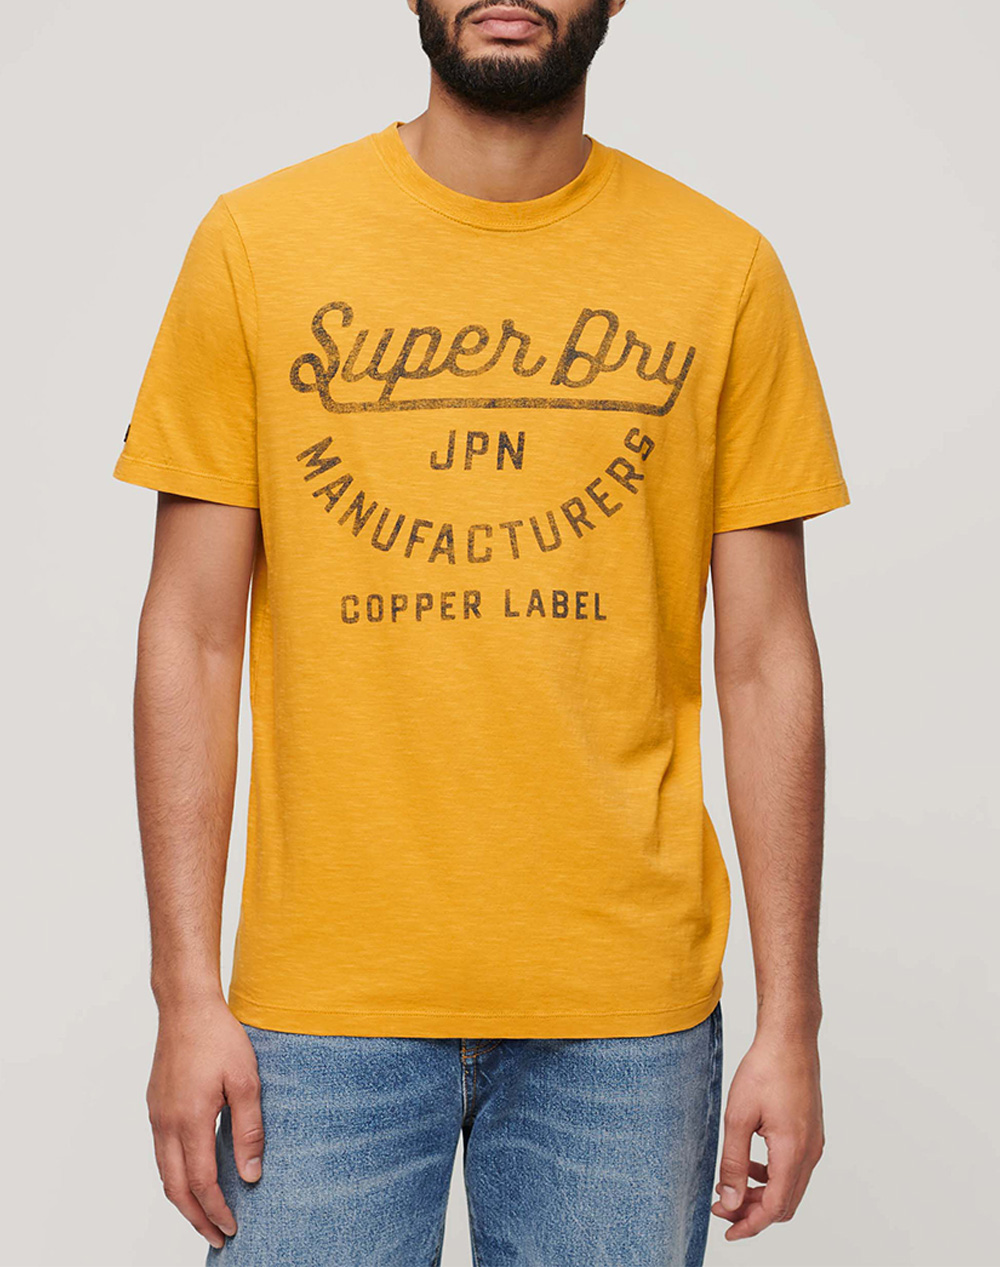 SUPERDRY D2 OVIN COPPER LABEL SCRIPT TEE ΜΠΛΟΥΖΑ ΑΝΔΡΙΚΟ M1011905A-2AO Yellow 3820ASUPE3400317_XR28301